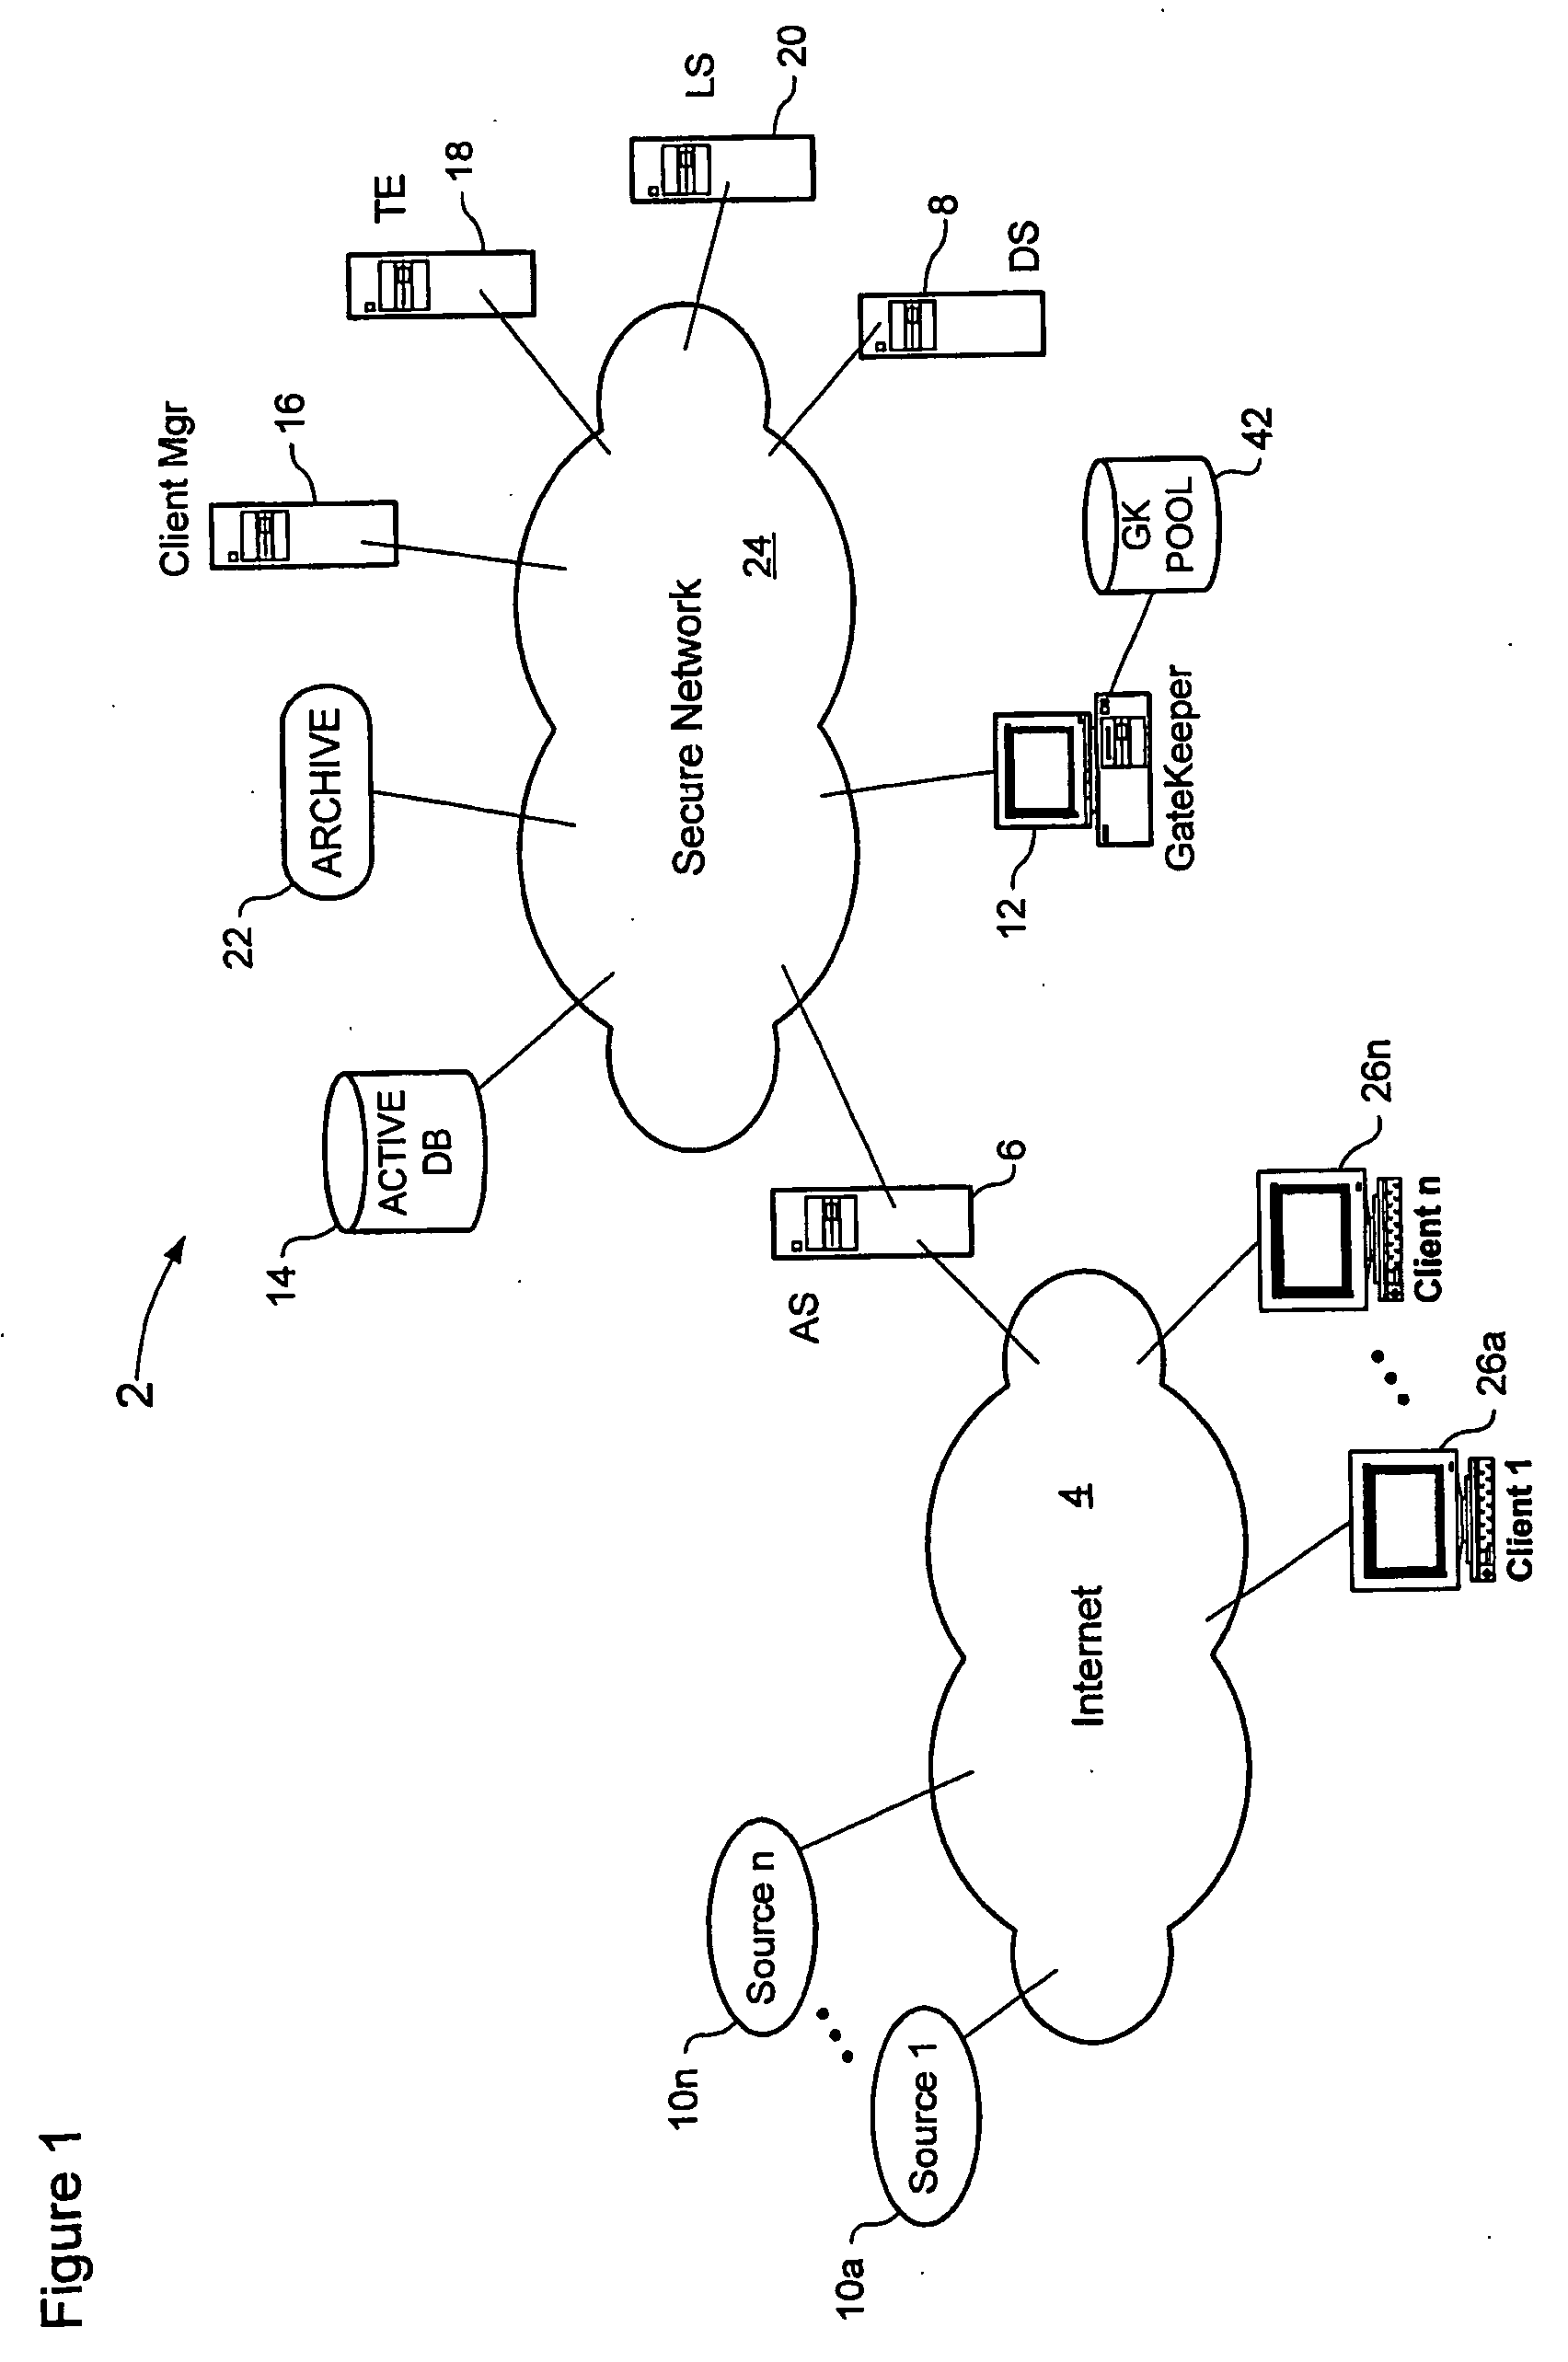 Method and system for aggregating and disseminating time-sensitive information